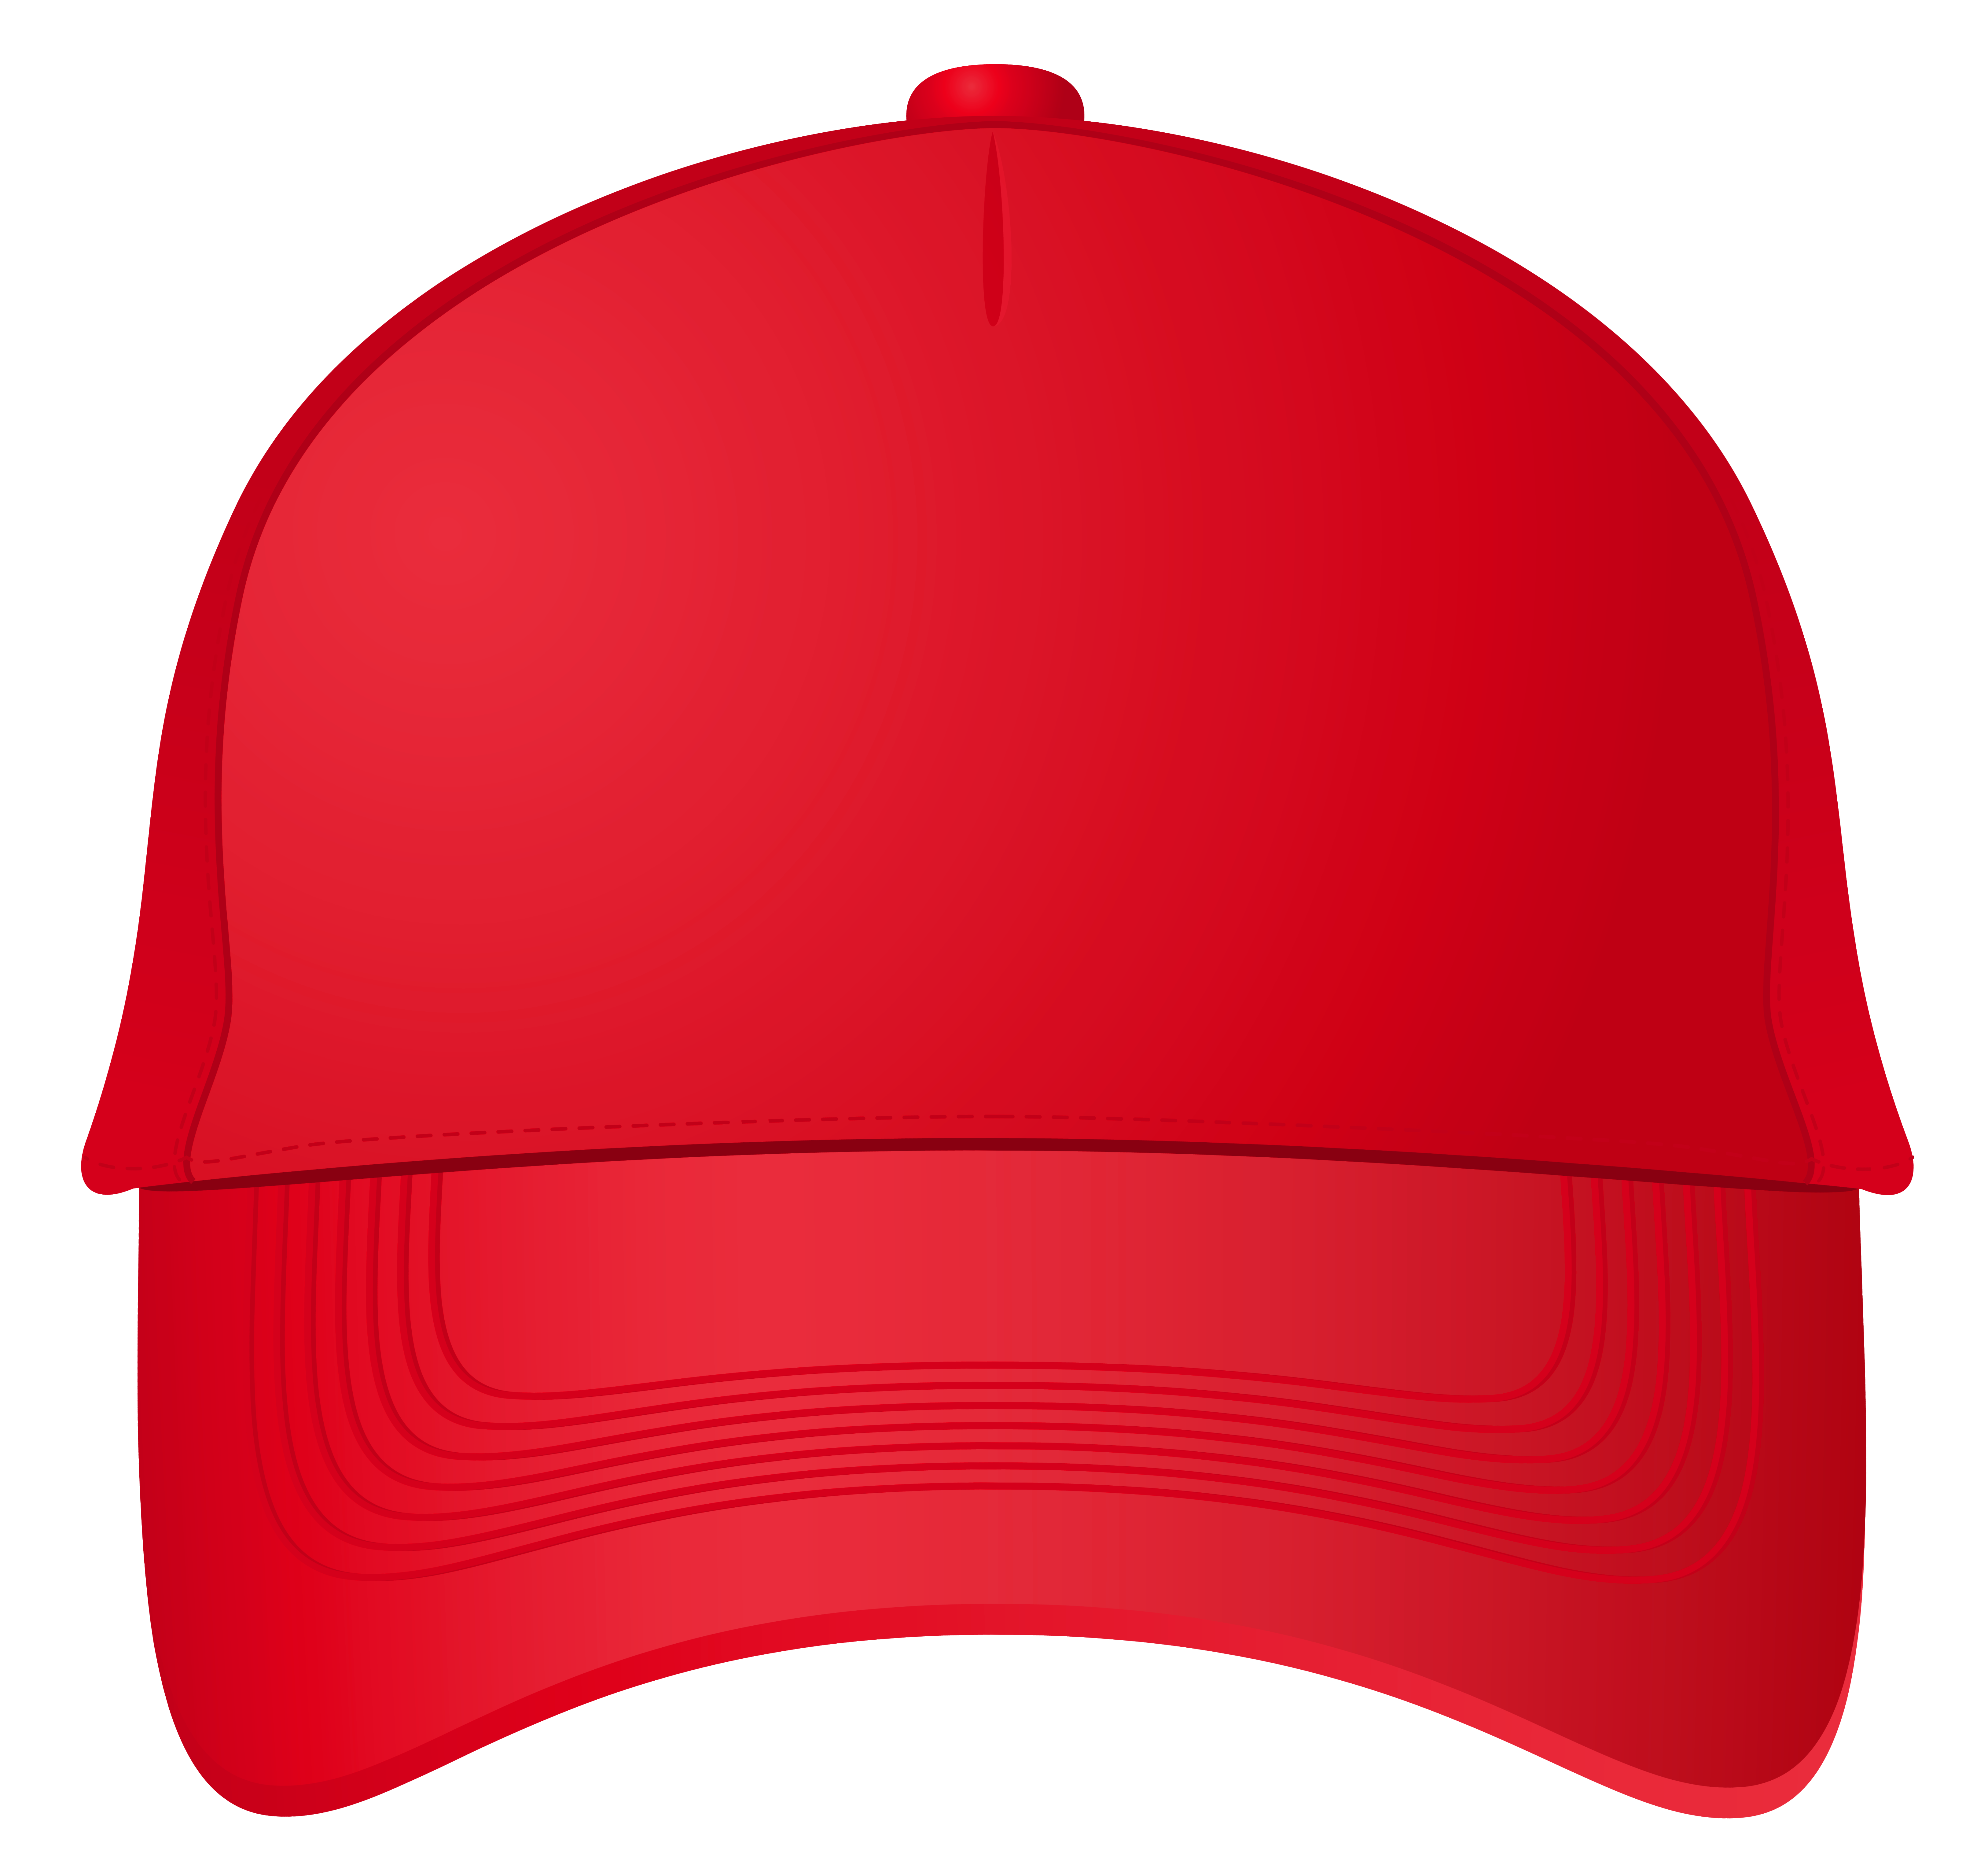 Red cap clipart - Clipground